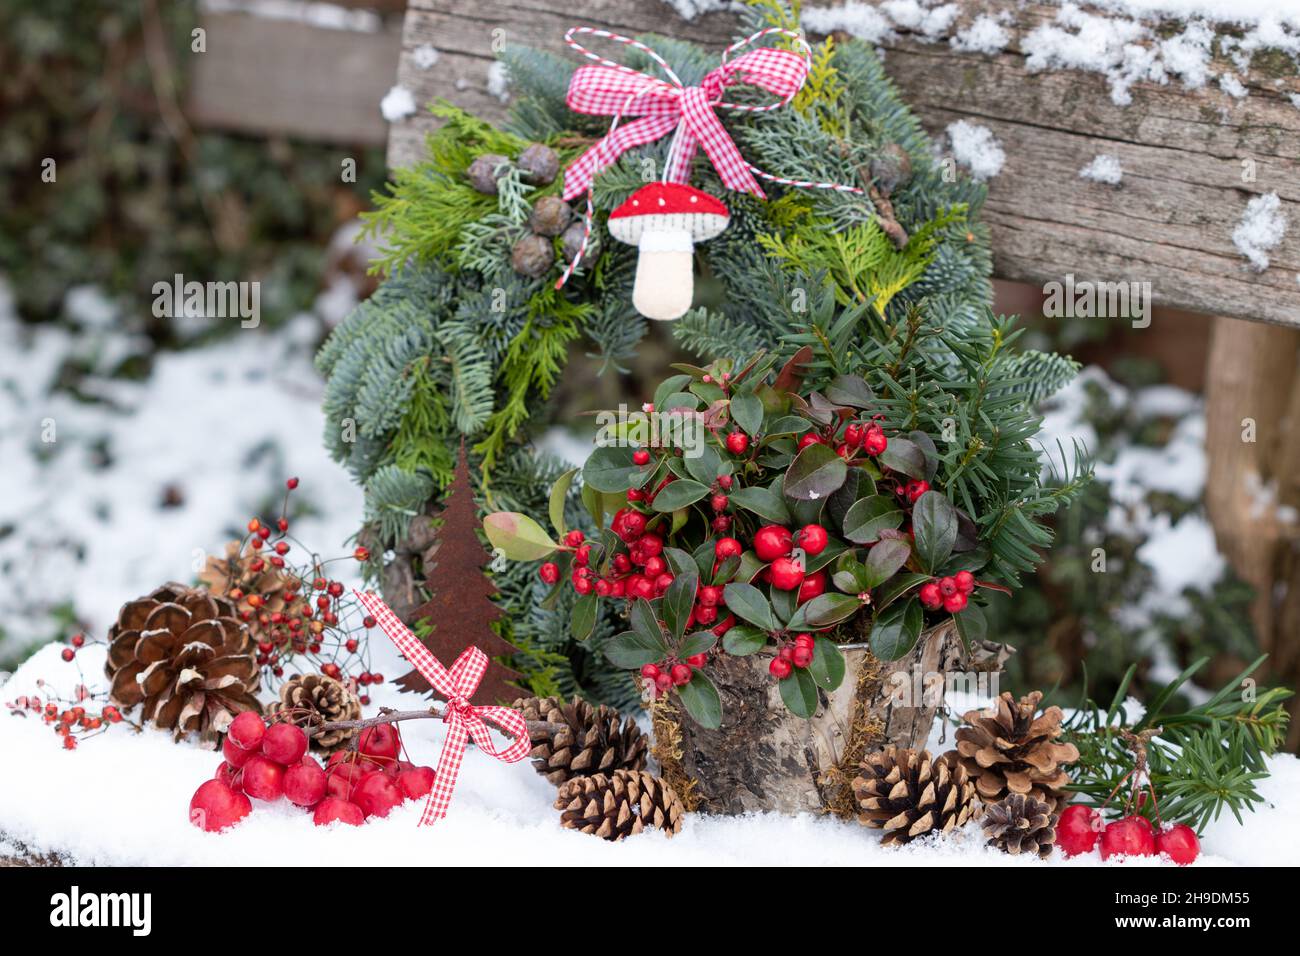 decoration with wintergreen  in pot, pine cones and crab apples in winter garden Stock Photo